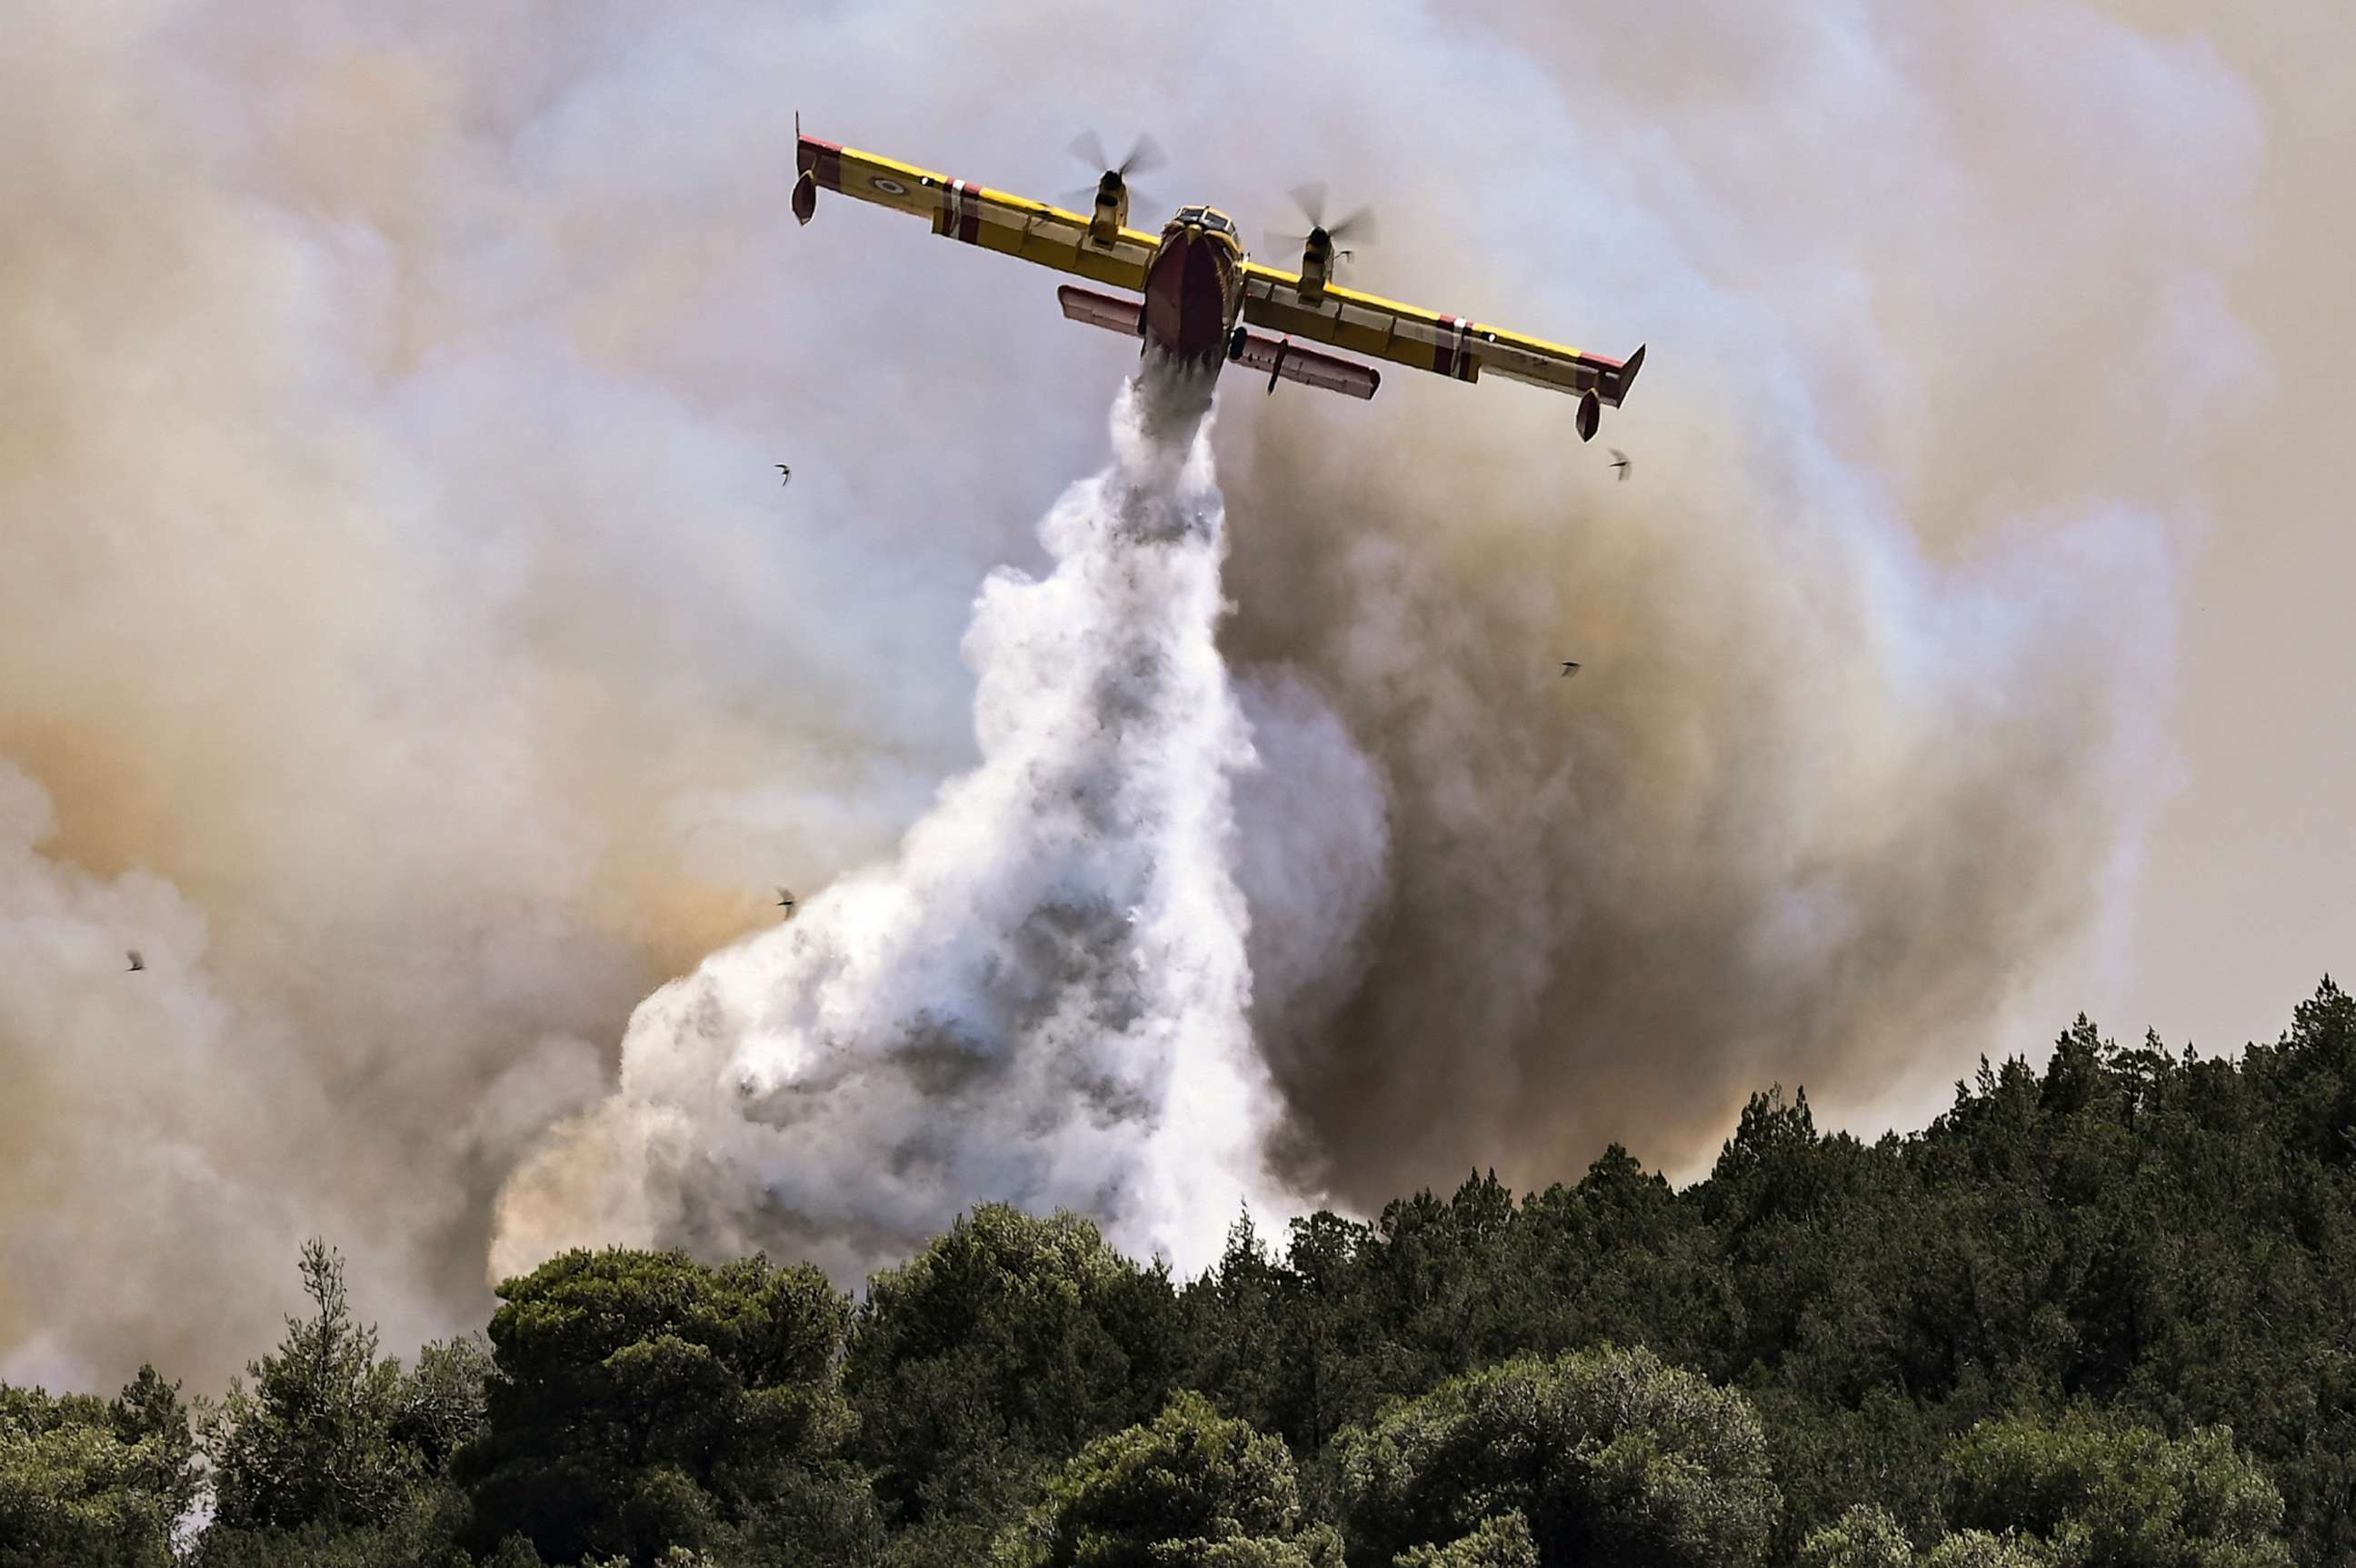 PHOTO: A Canadair firefighting plane sprays water during a fire in Dervenochoria, north-west of Athens, on July 19, 2023.